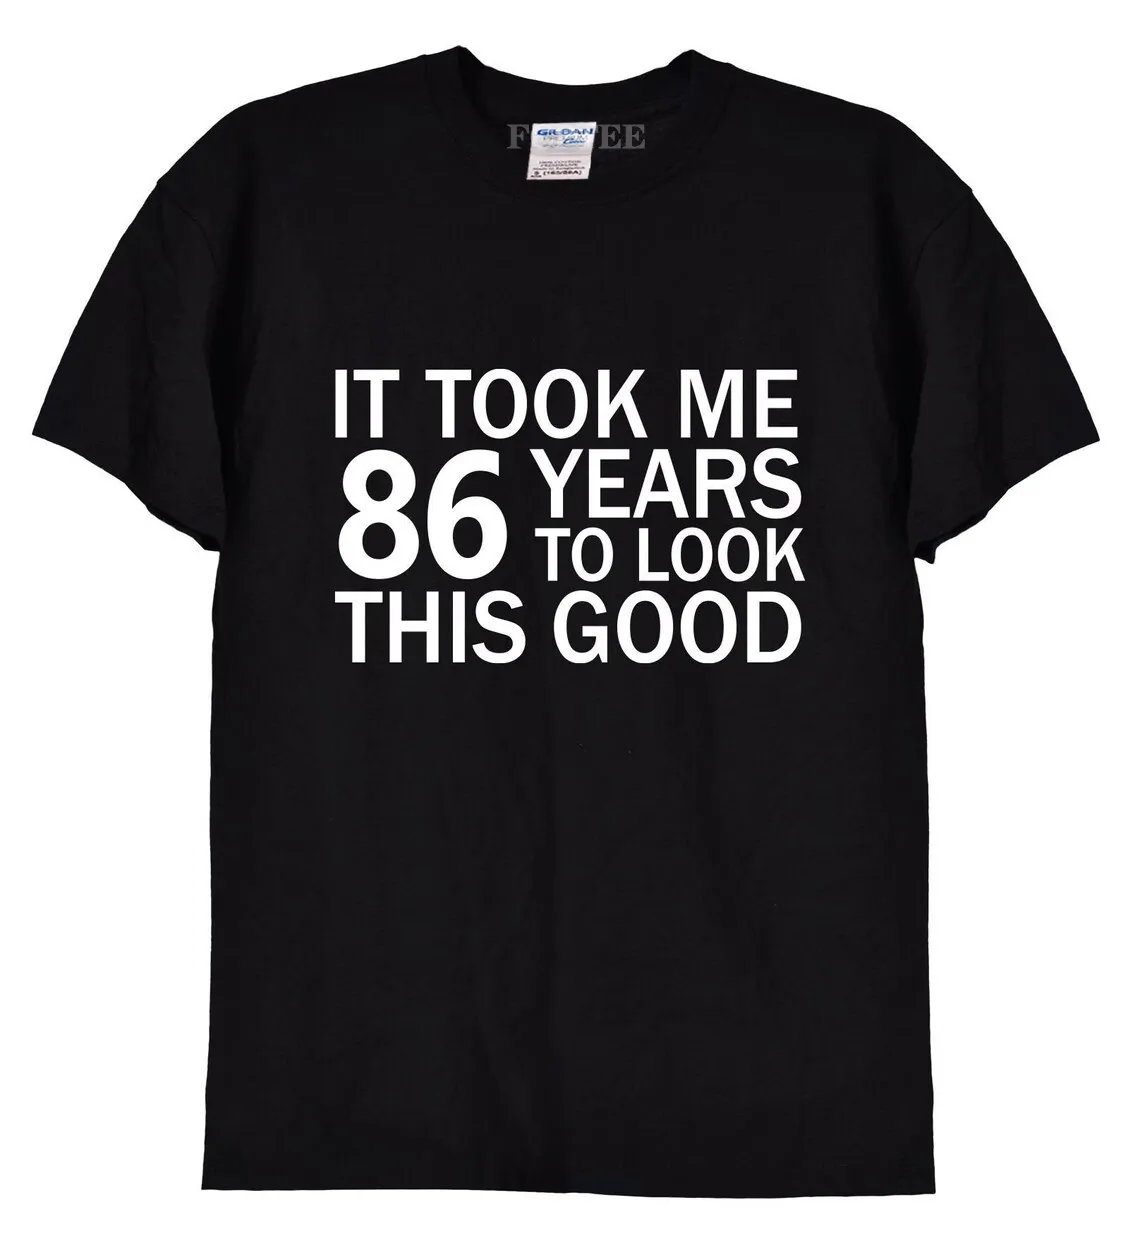 

It Took Me 86 88 Years To Look This Good Funny T Shirts For Men And Women Novelty Gifts Tee Shirts Retro Cotton Tops Shirts